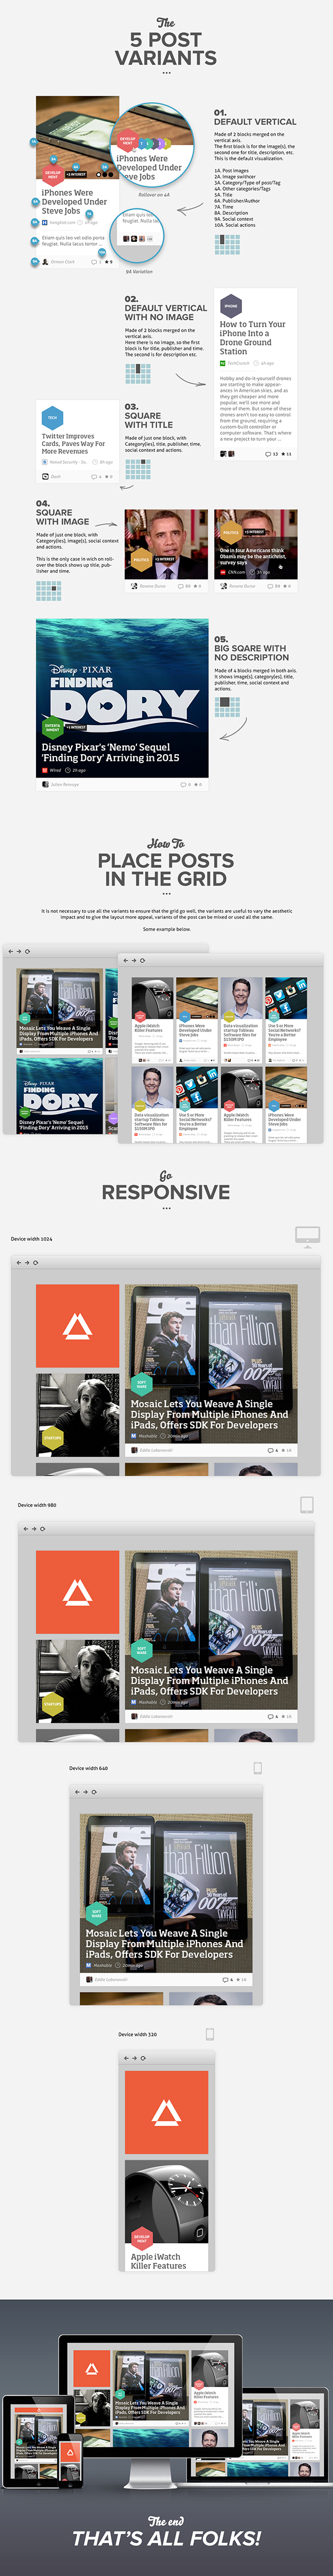 feed  news feed colorfull colors Blog magazine grid regular grid Responsive Startup UI ux user interface user experience news